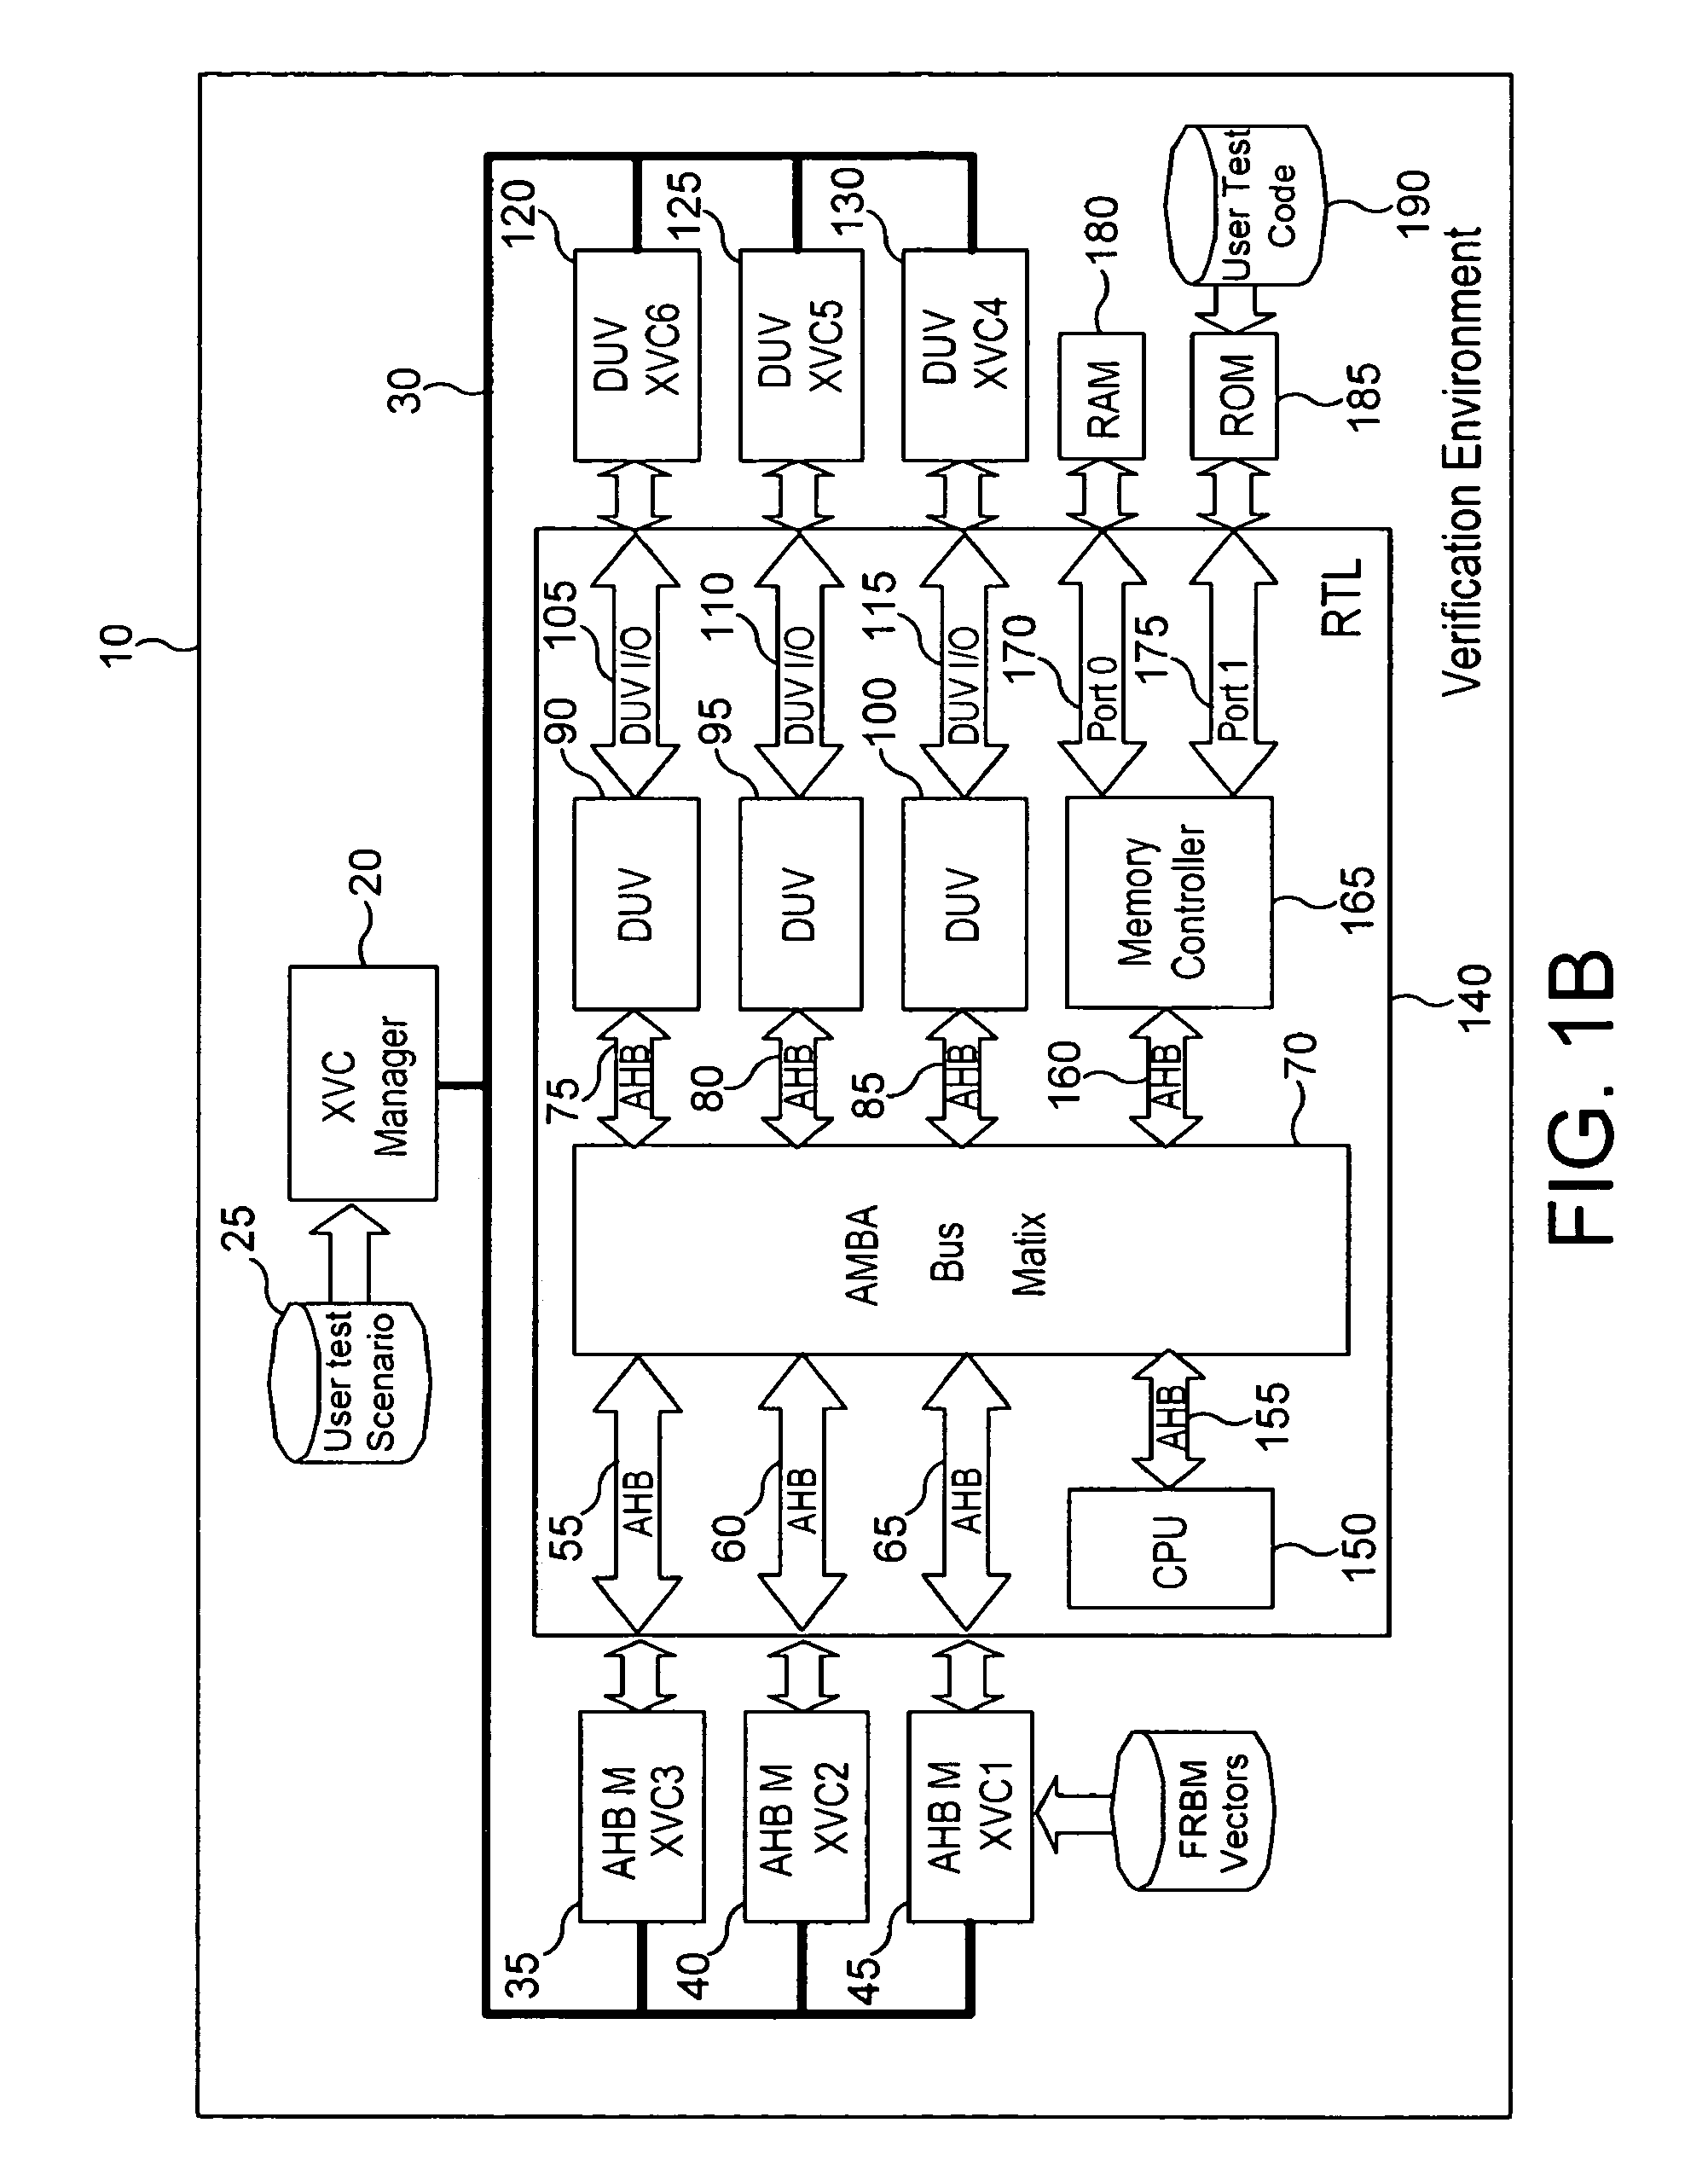 Apparatus and method for performing hardware and software co-verification testing